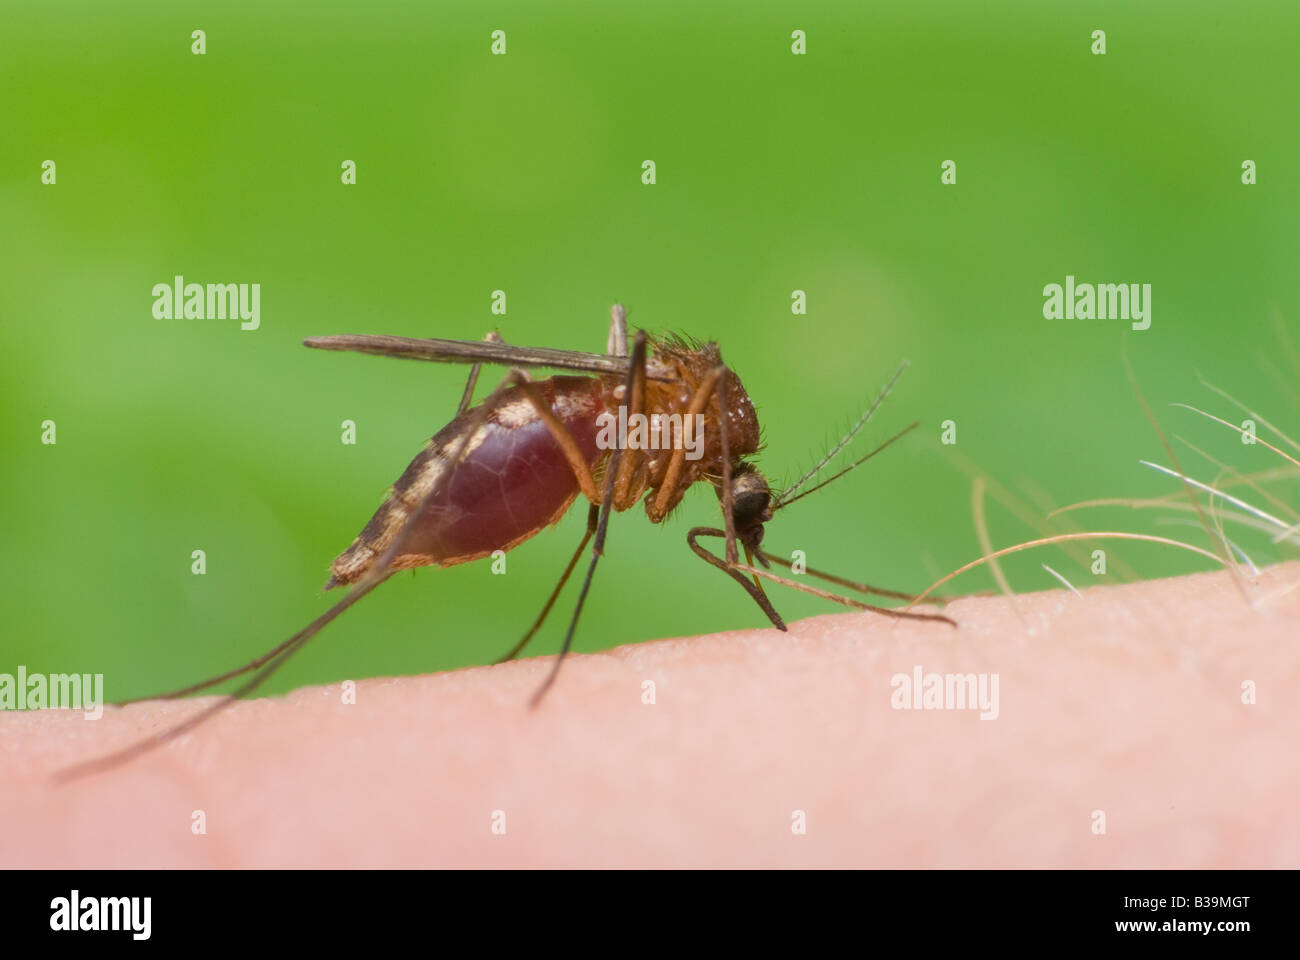 biting mosquito with blood (1) Stock Photo